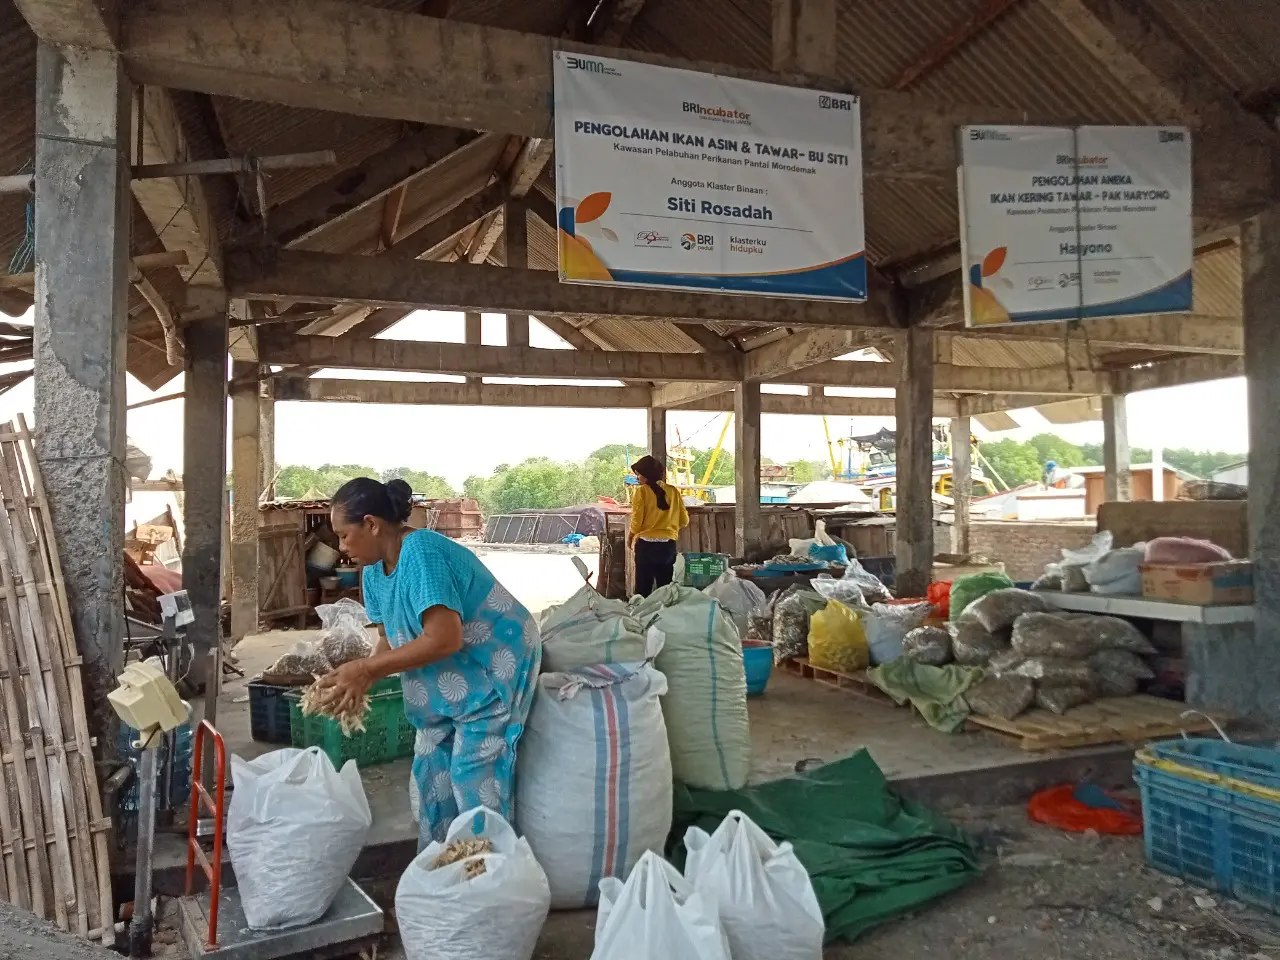 A fisherwoman weighs dried fish at the dried and salted fish center surrounded by other bagged food items